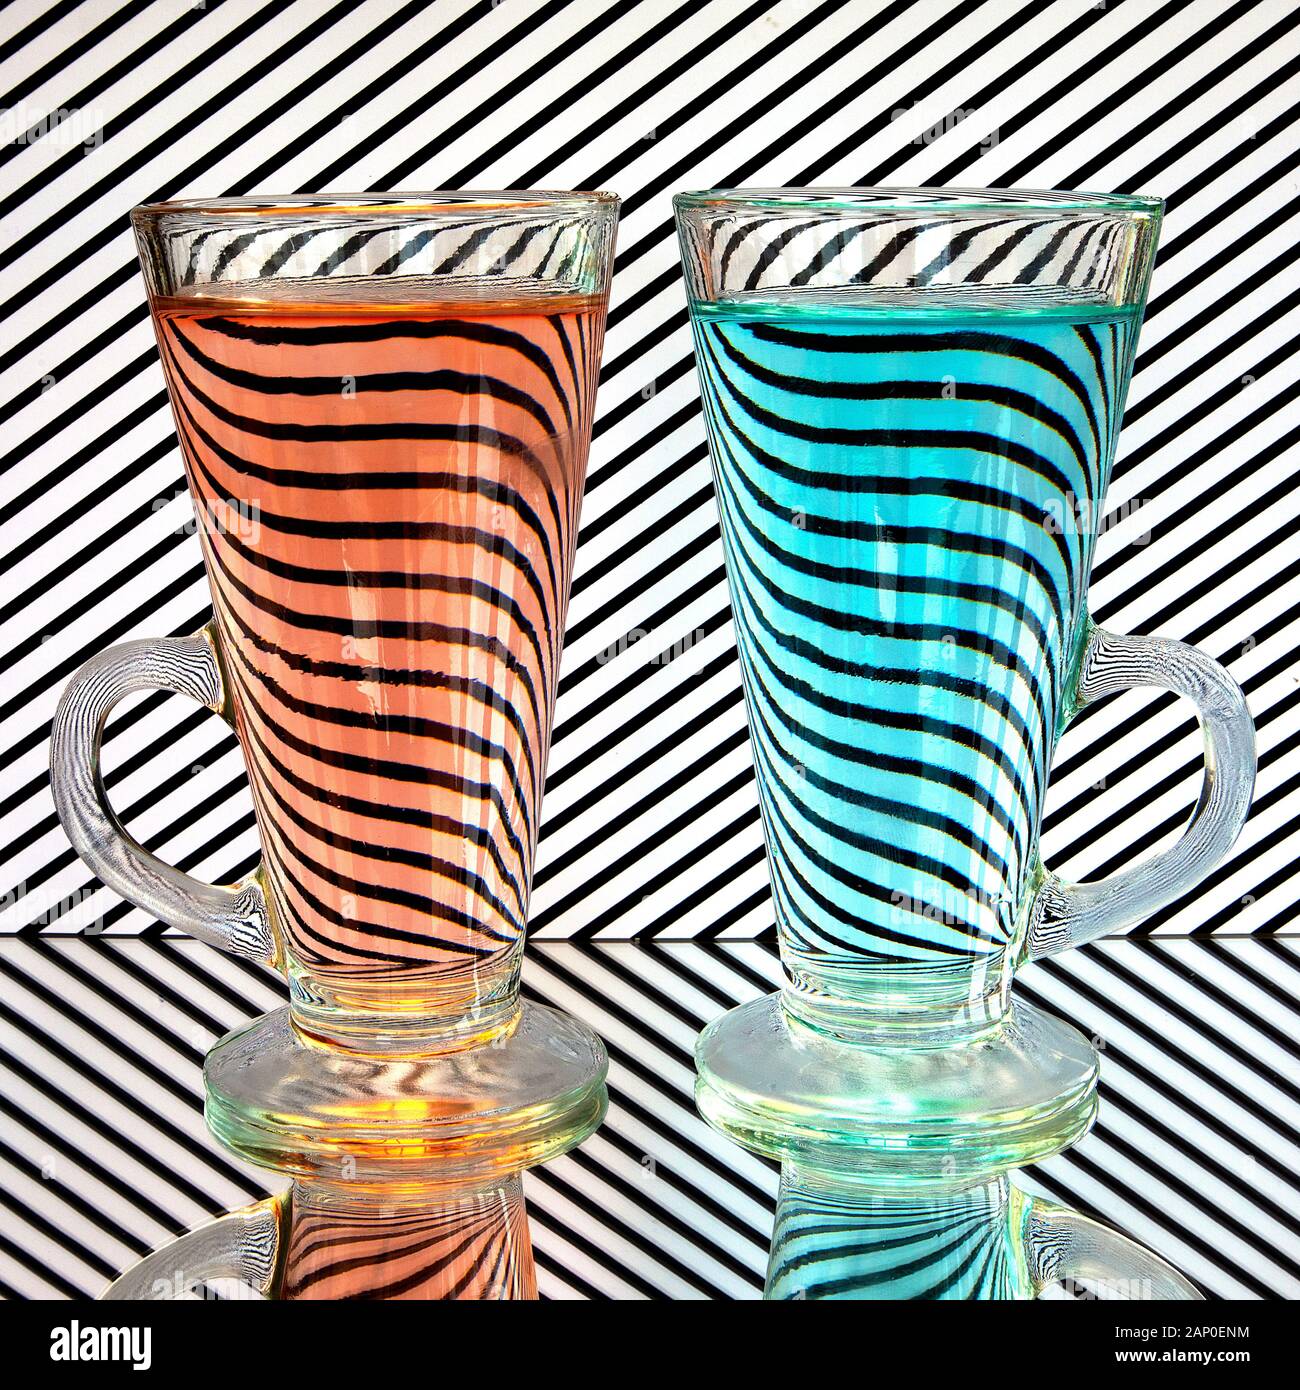 An image to demonstrate optical effects in glass and water for both artistic and educational purposes. Stock Photo